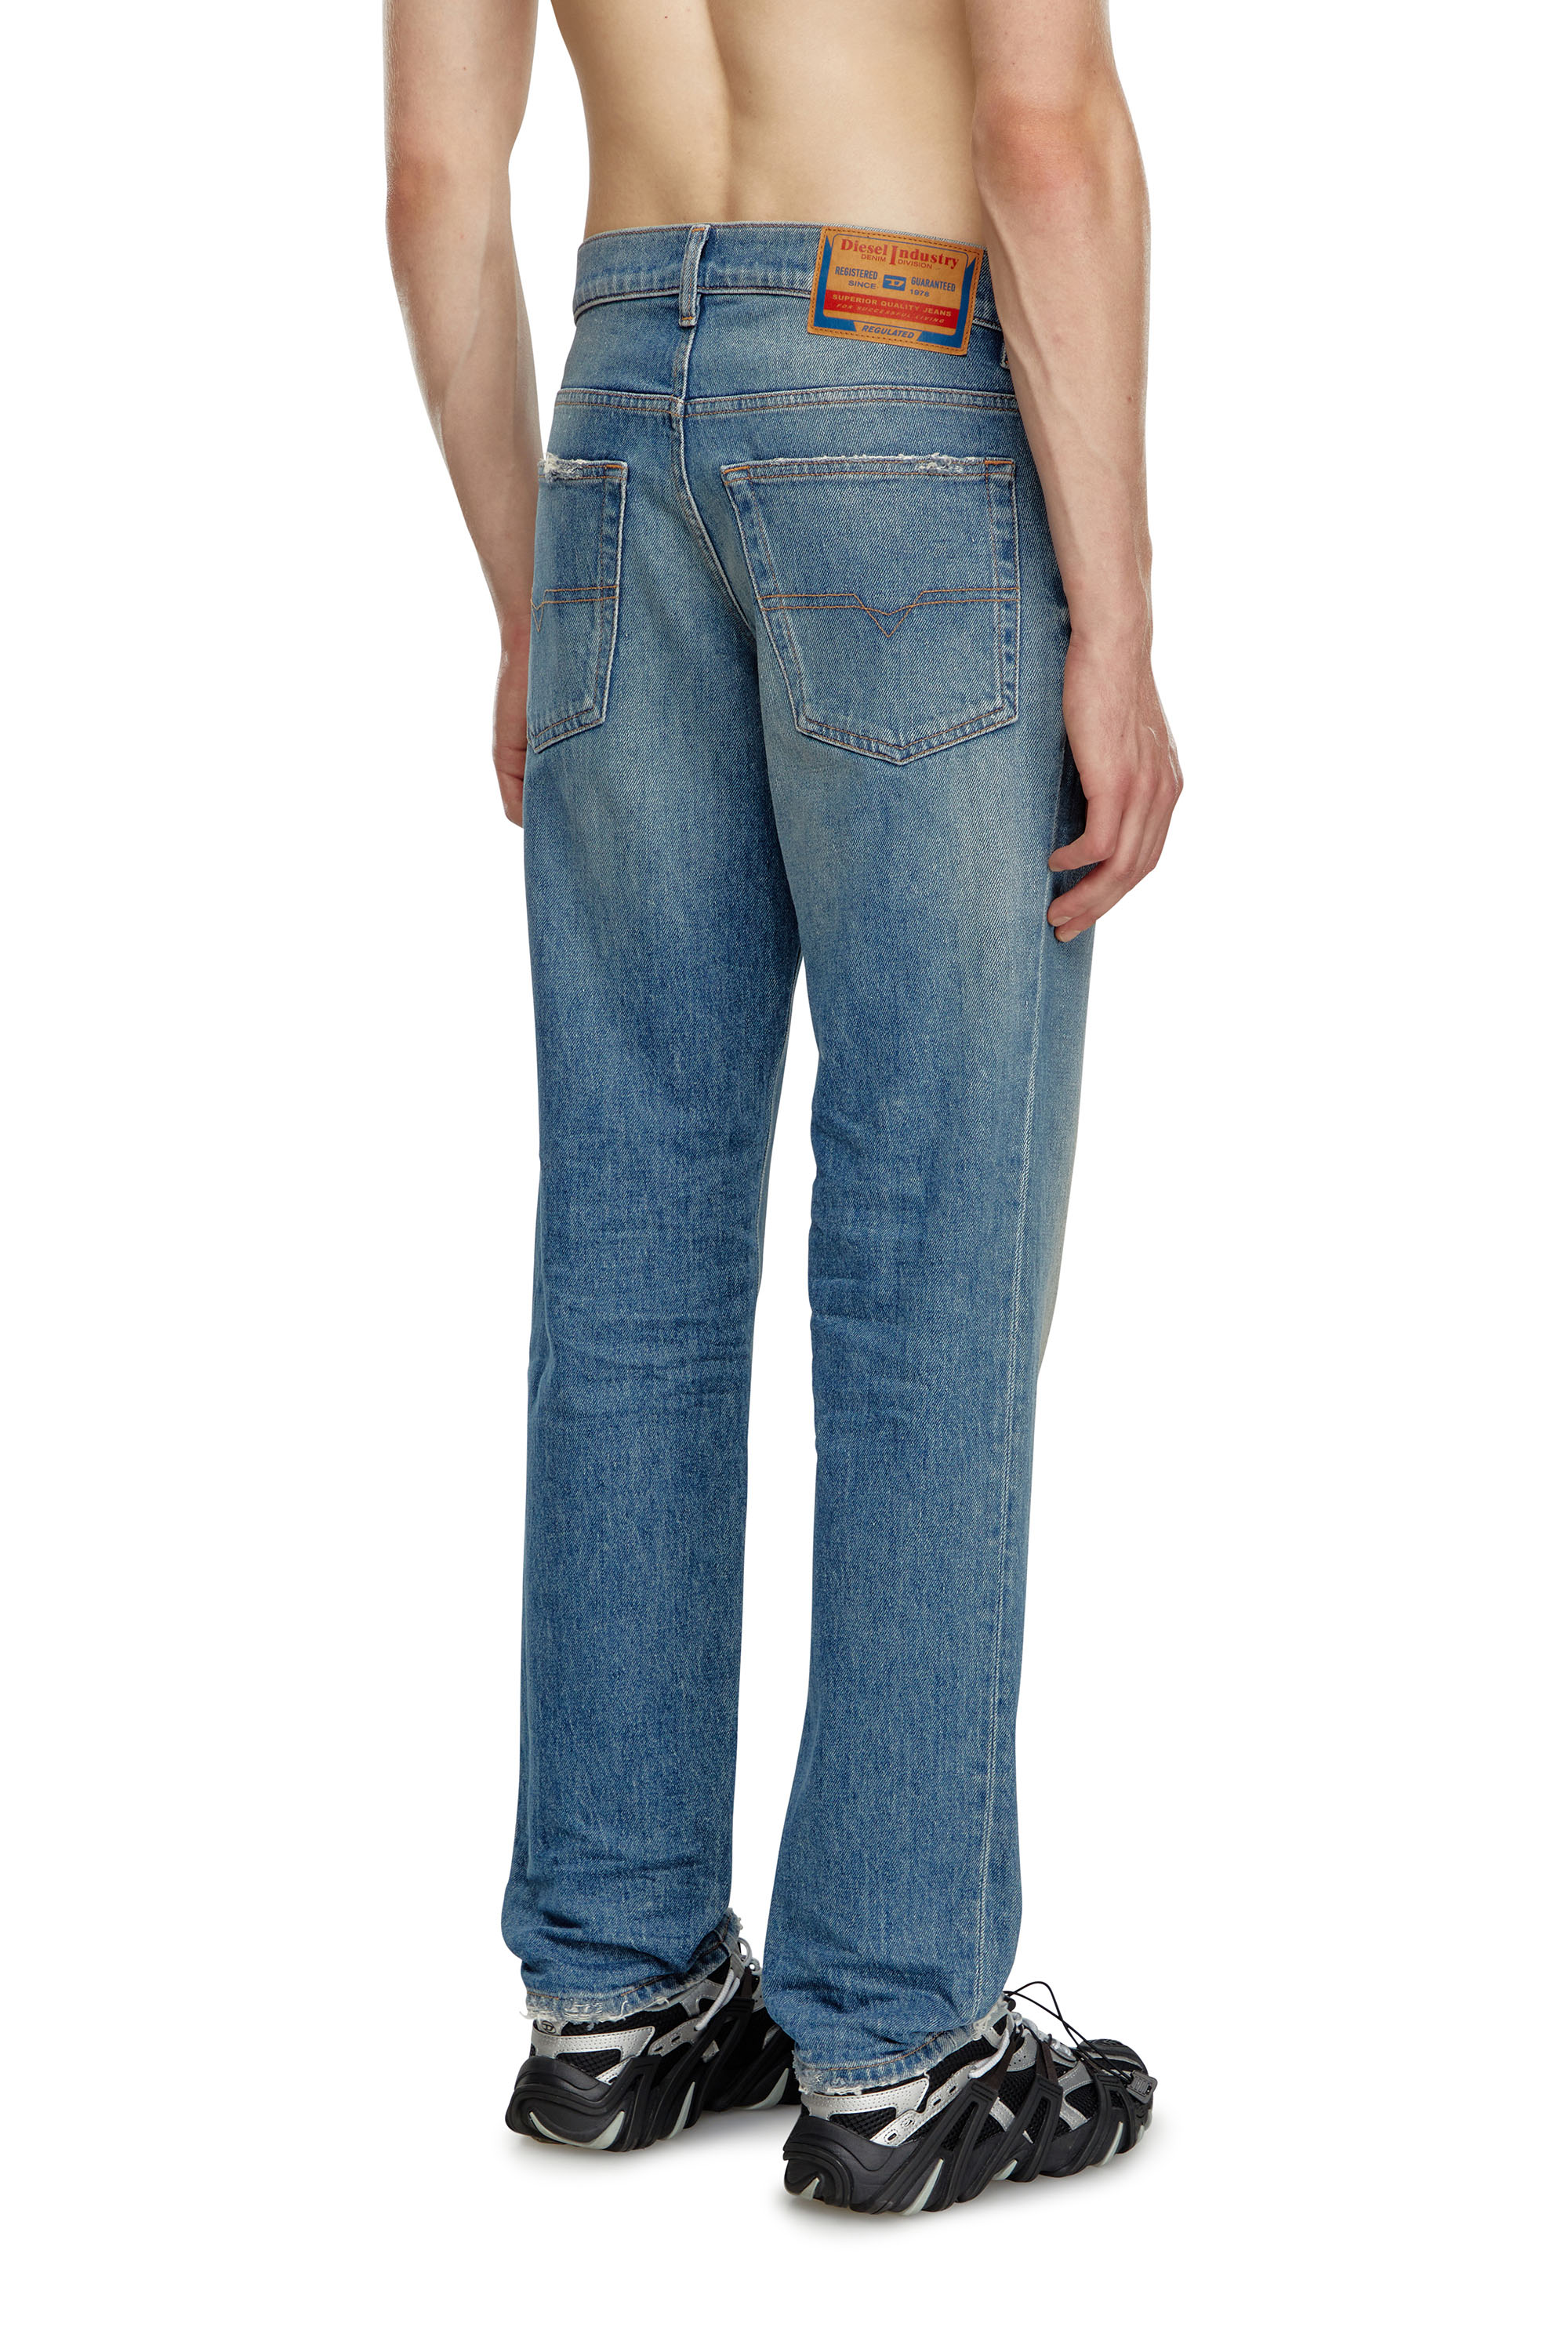 Diesel - Tapered Jeans 2023 D-Finitive 0GRDB, Hombre Tapered Jeans - 2023 D-Finitive in Azul marino - Image 4